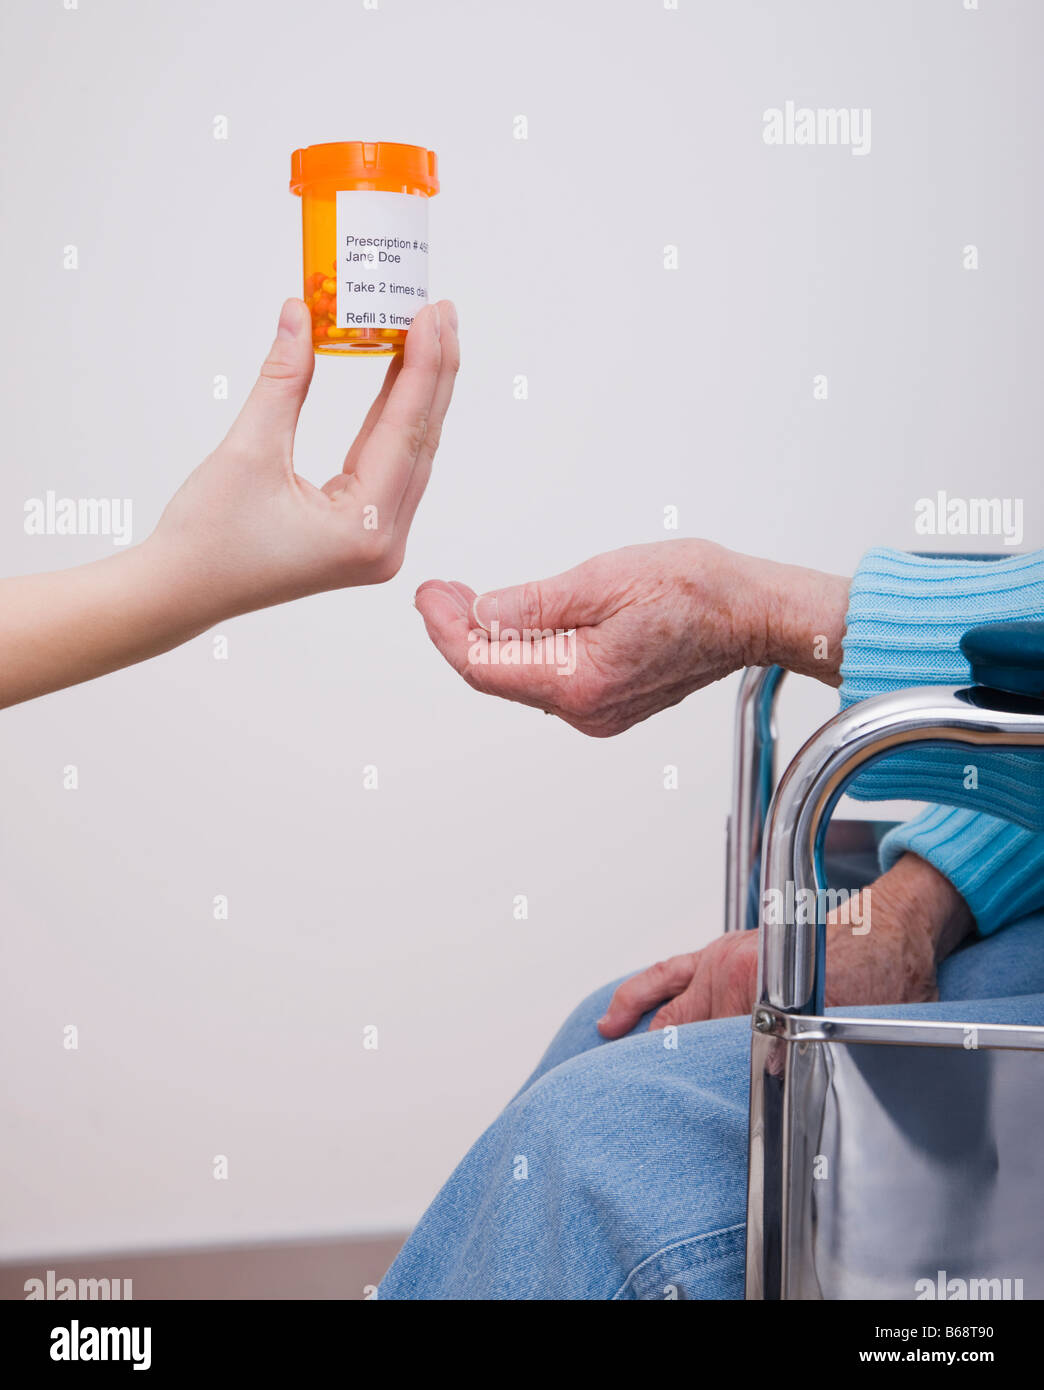 Young woman giving pill bottle to senior woman, close-up of hands Stock Photo